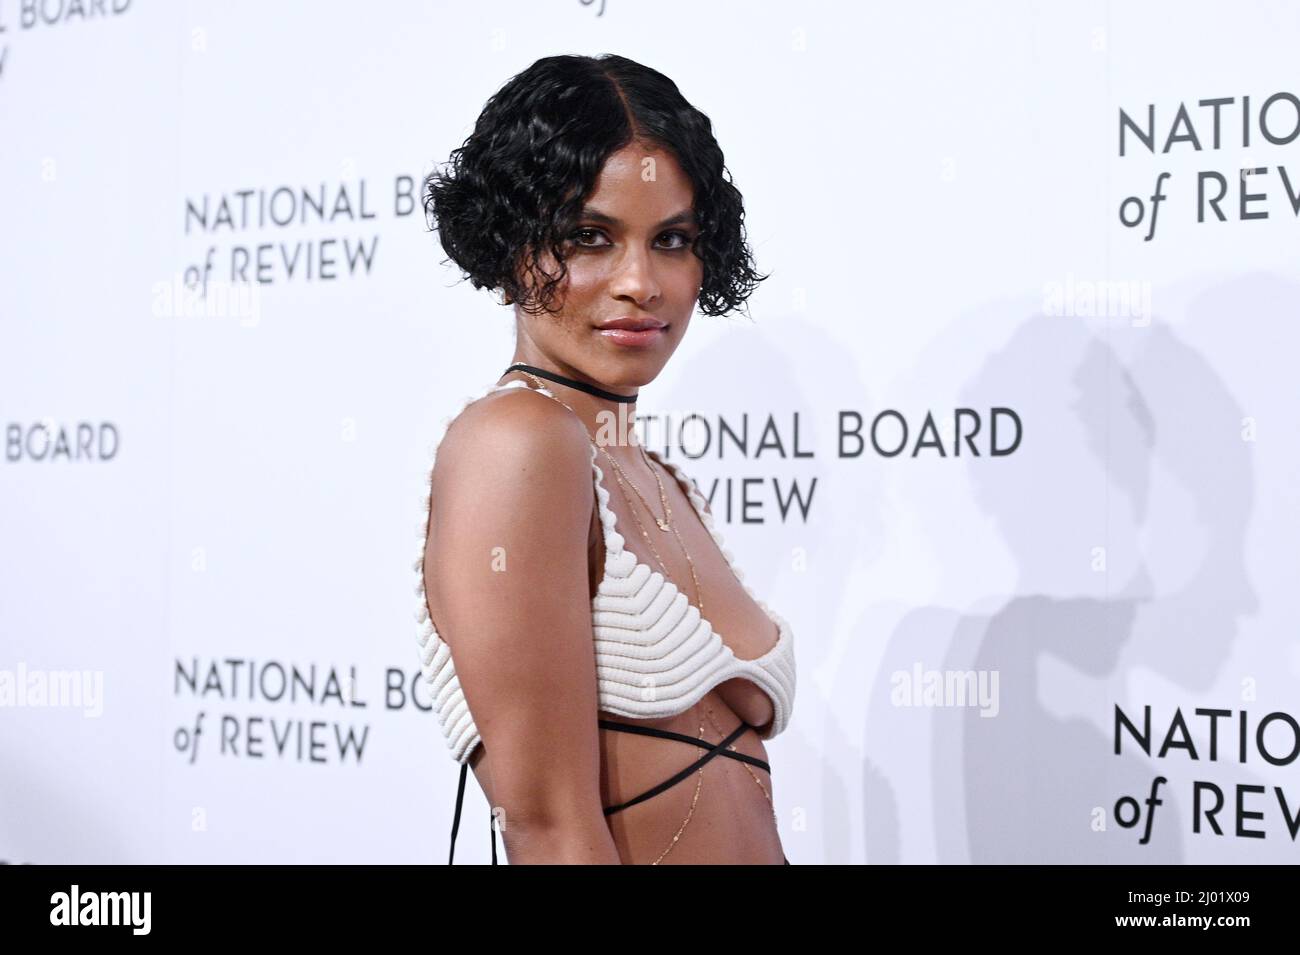 German-US actress Zazie Beetz walking on the red carpet during the